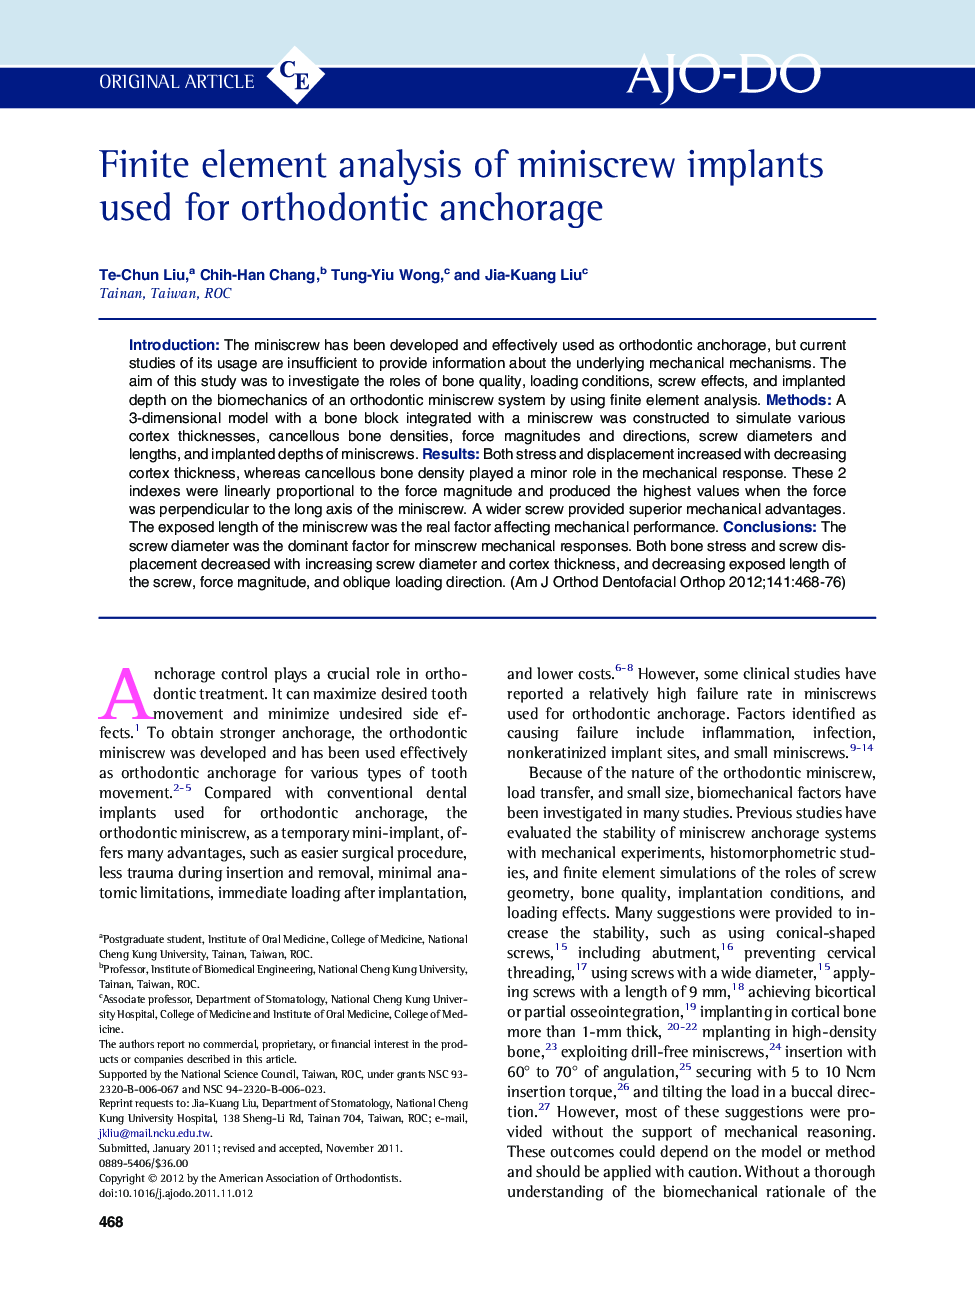 Finite element analysis of miniscrew implants used for orthodontic anchorage 